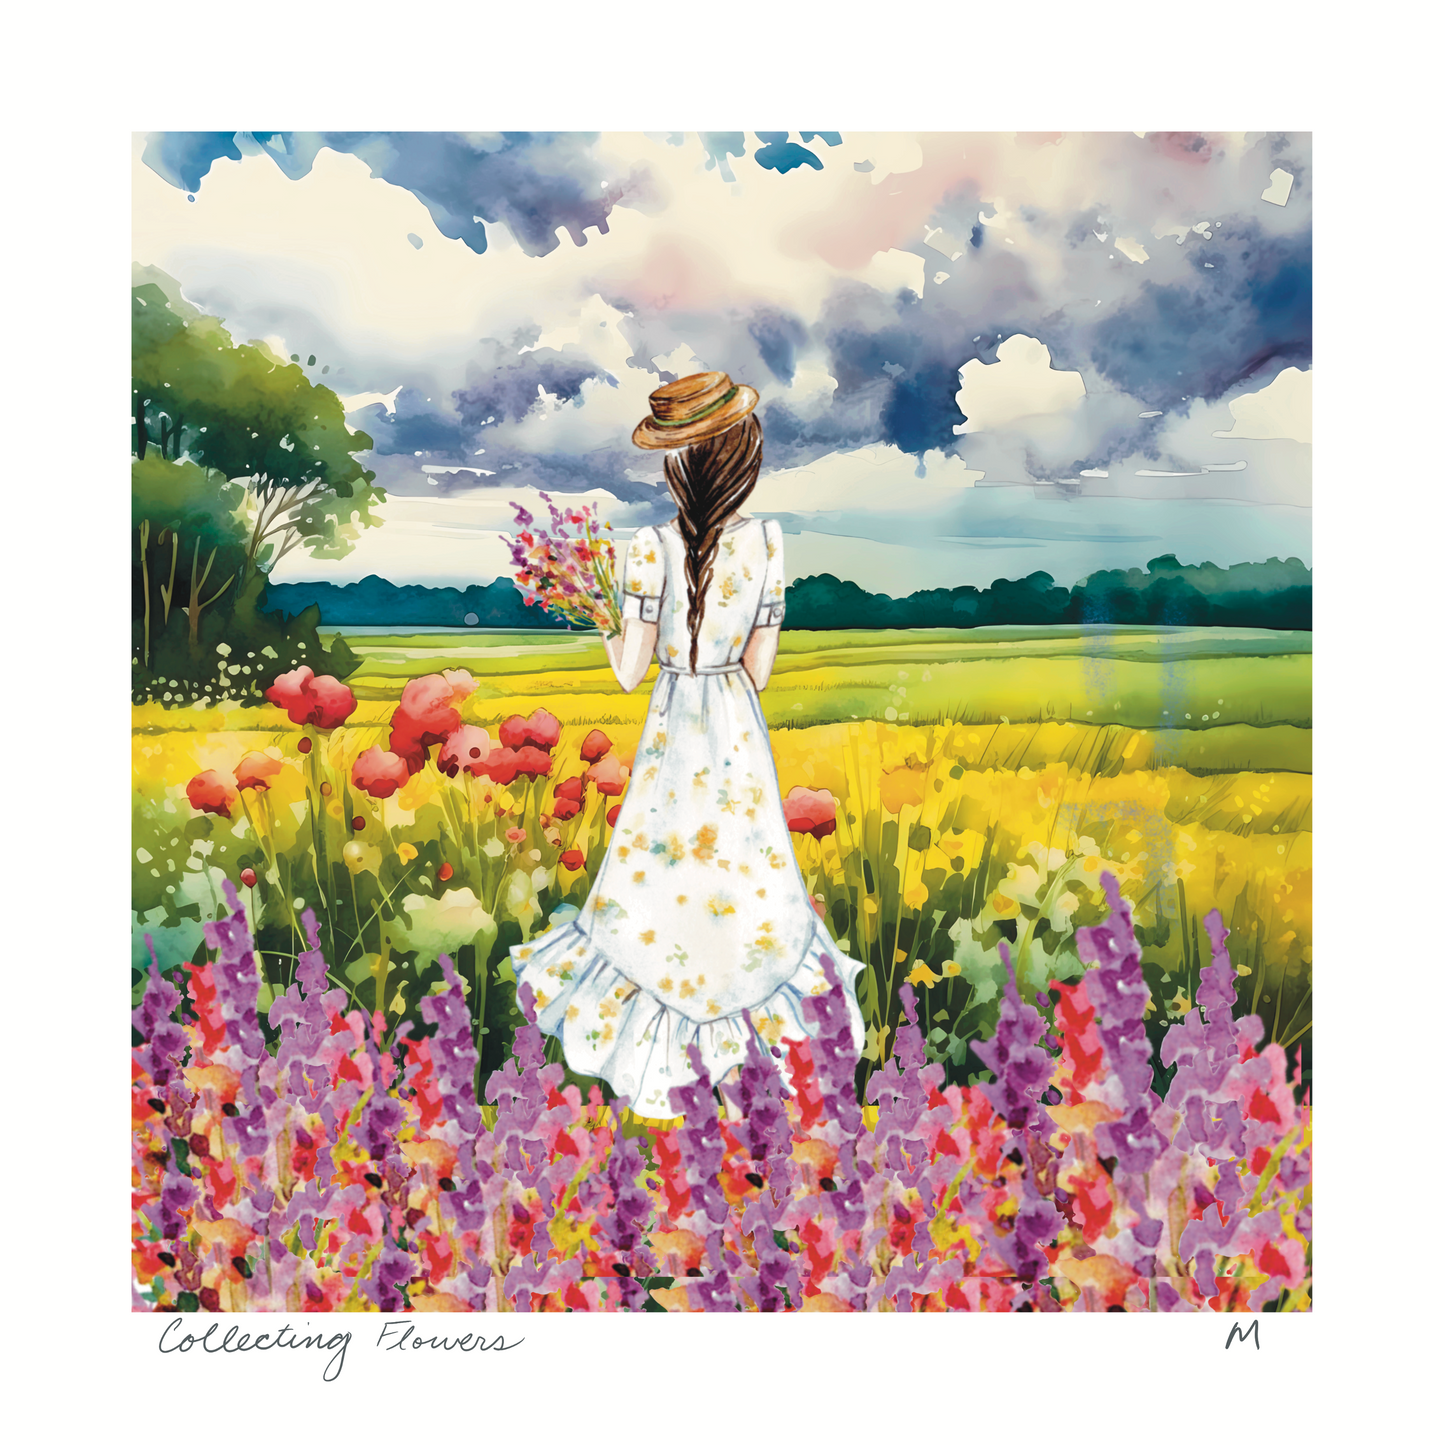 'Collecting Flowers' Art Print